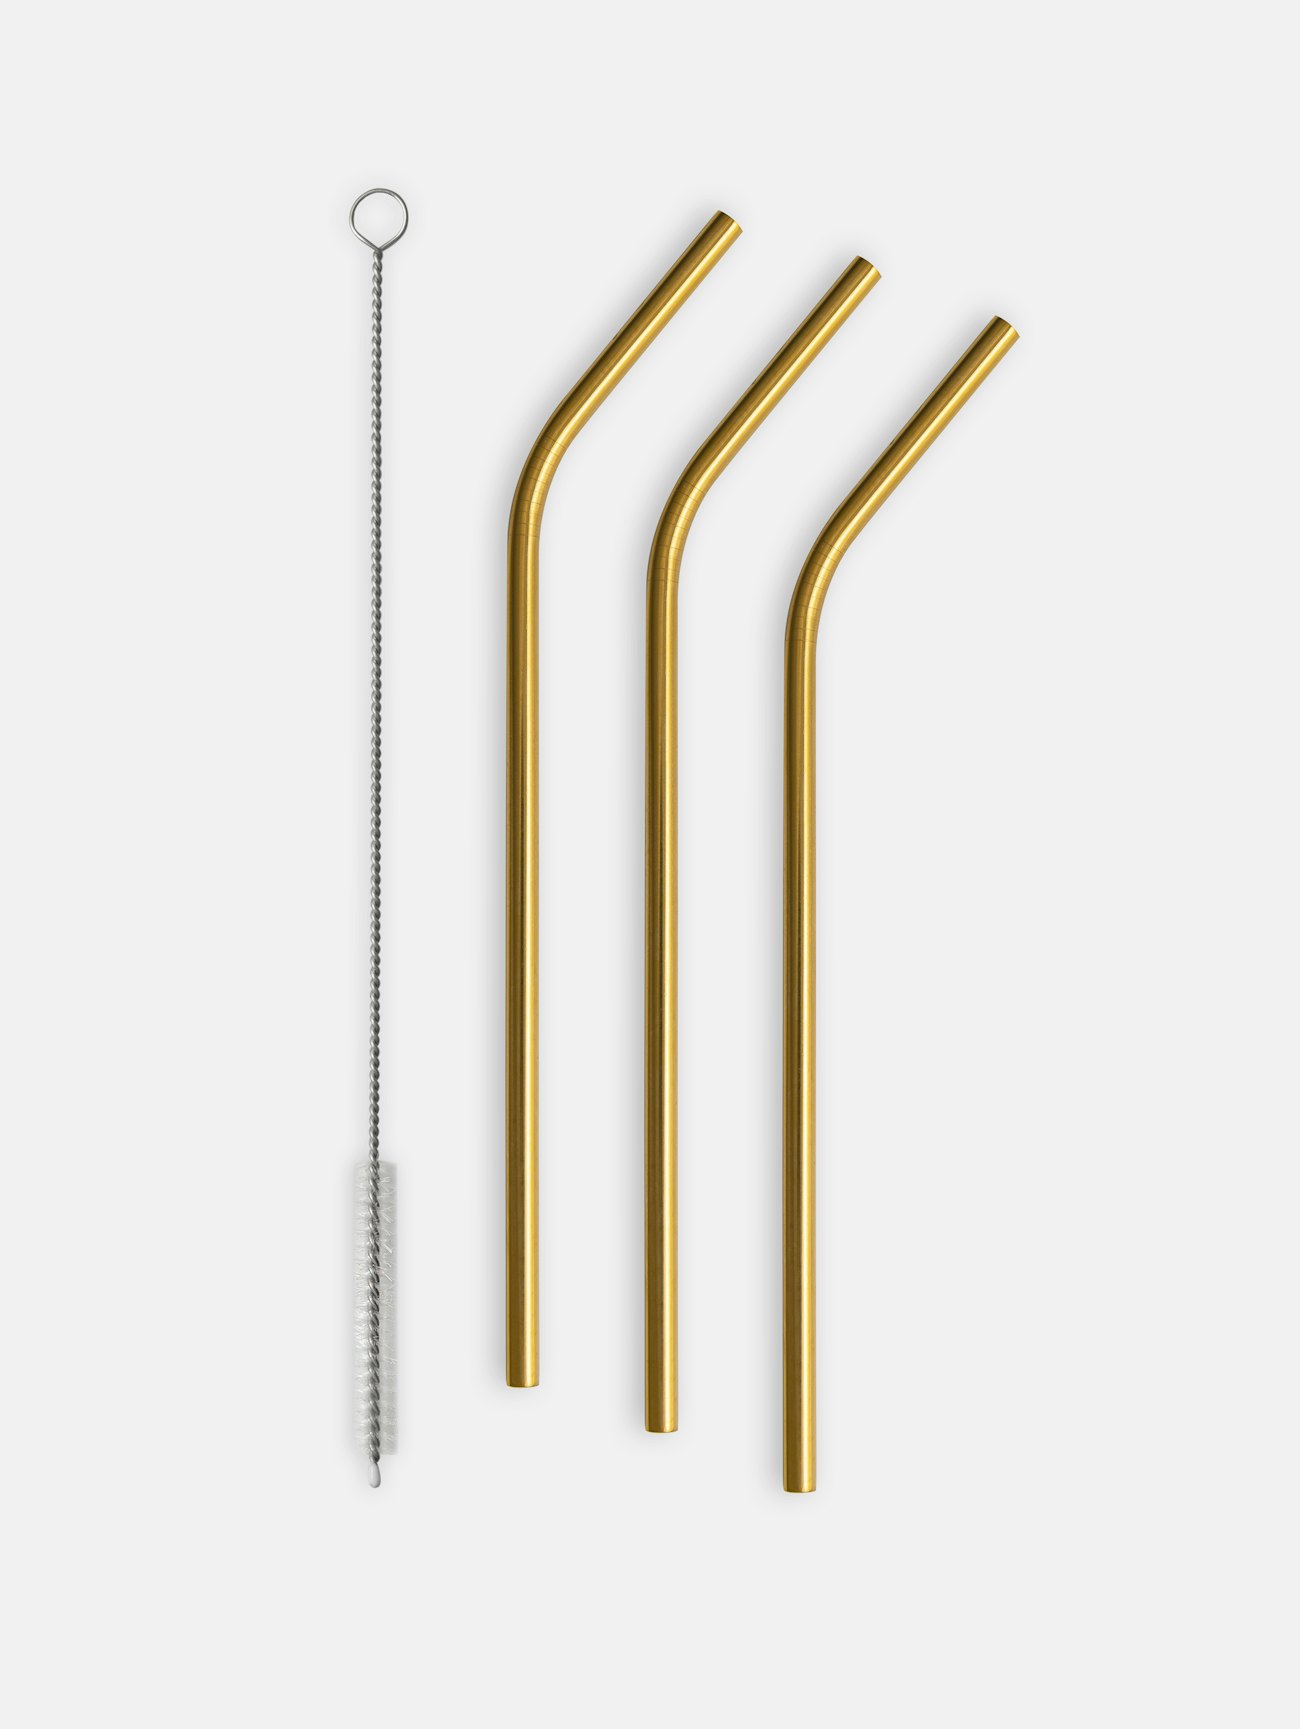 Peak straw 210mm 4-pack incl. cleaning brush